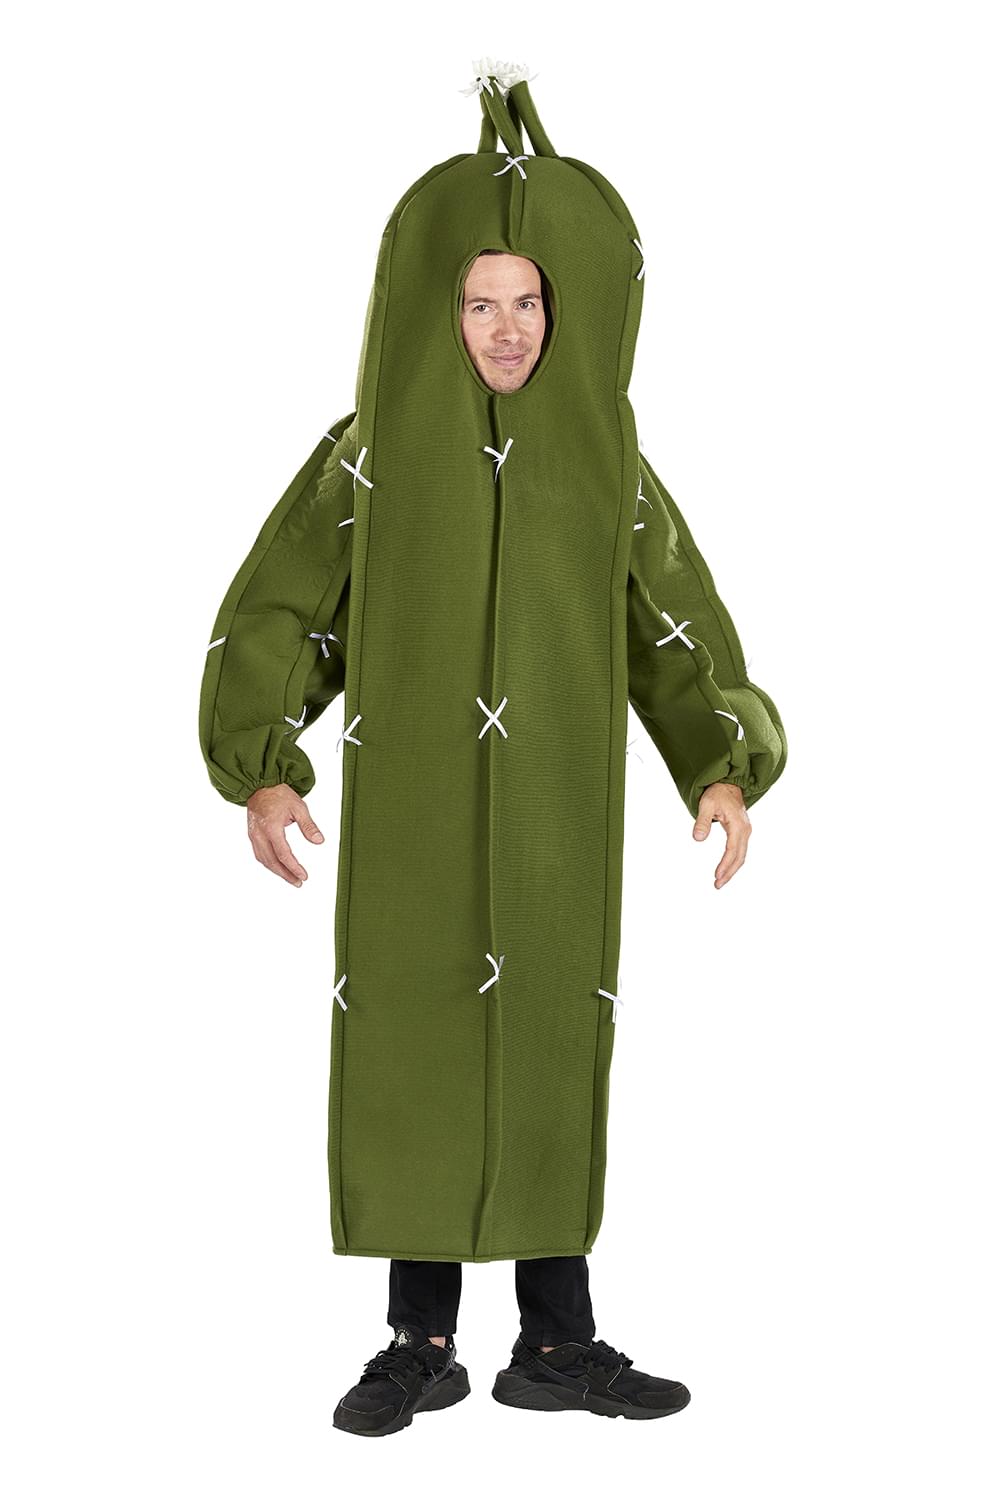 Cactus Costume for Adults | One-Piece Adult Costume | One Size Fits Most